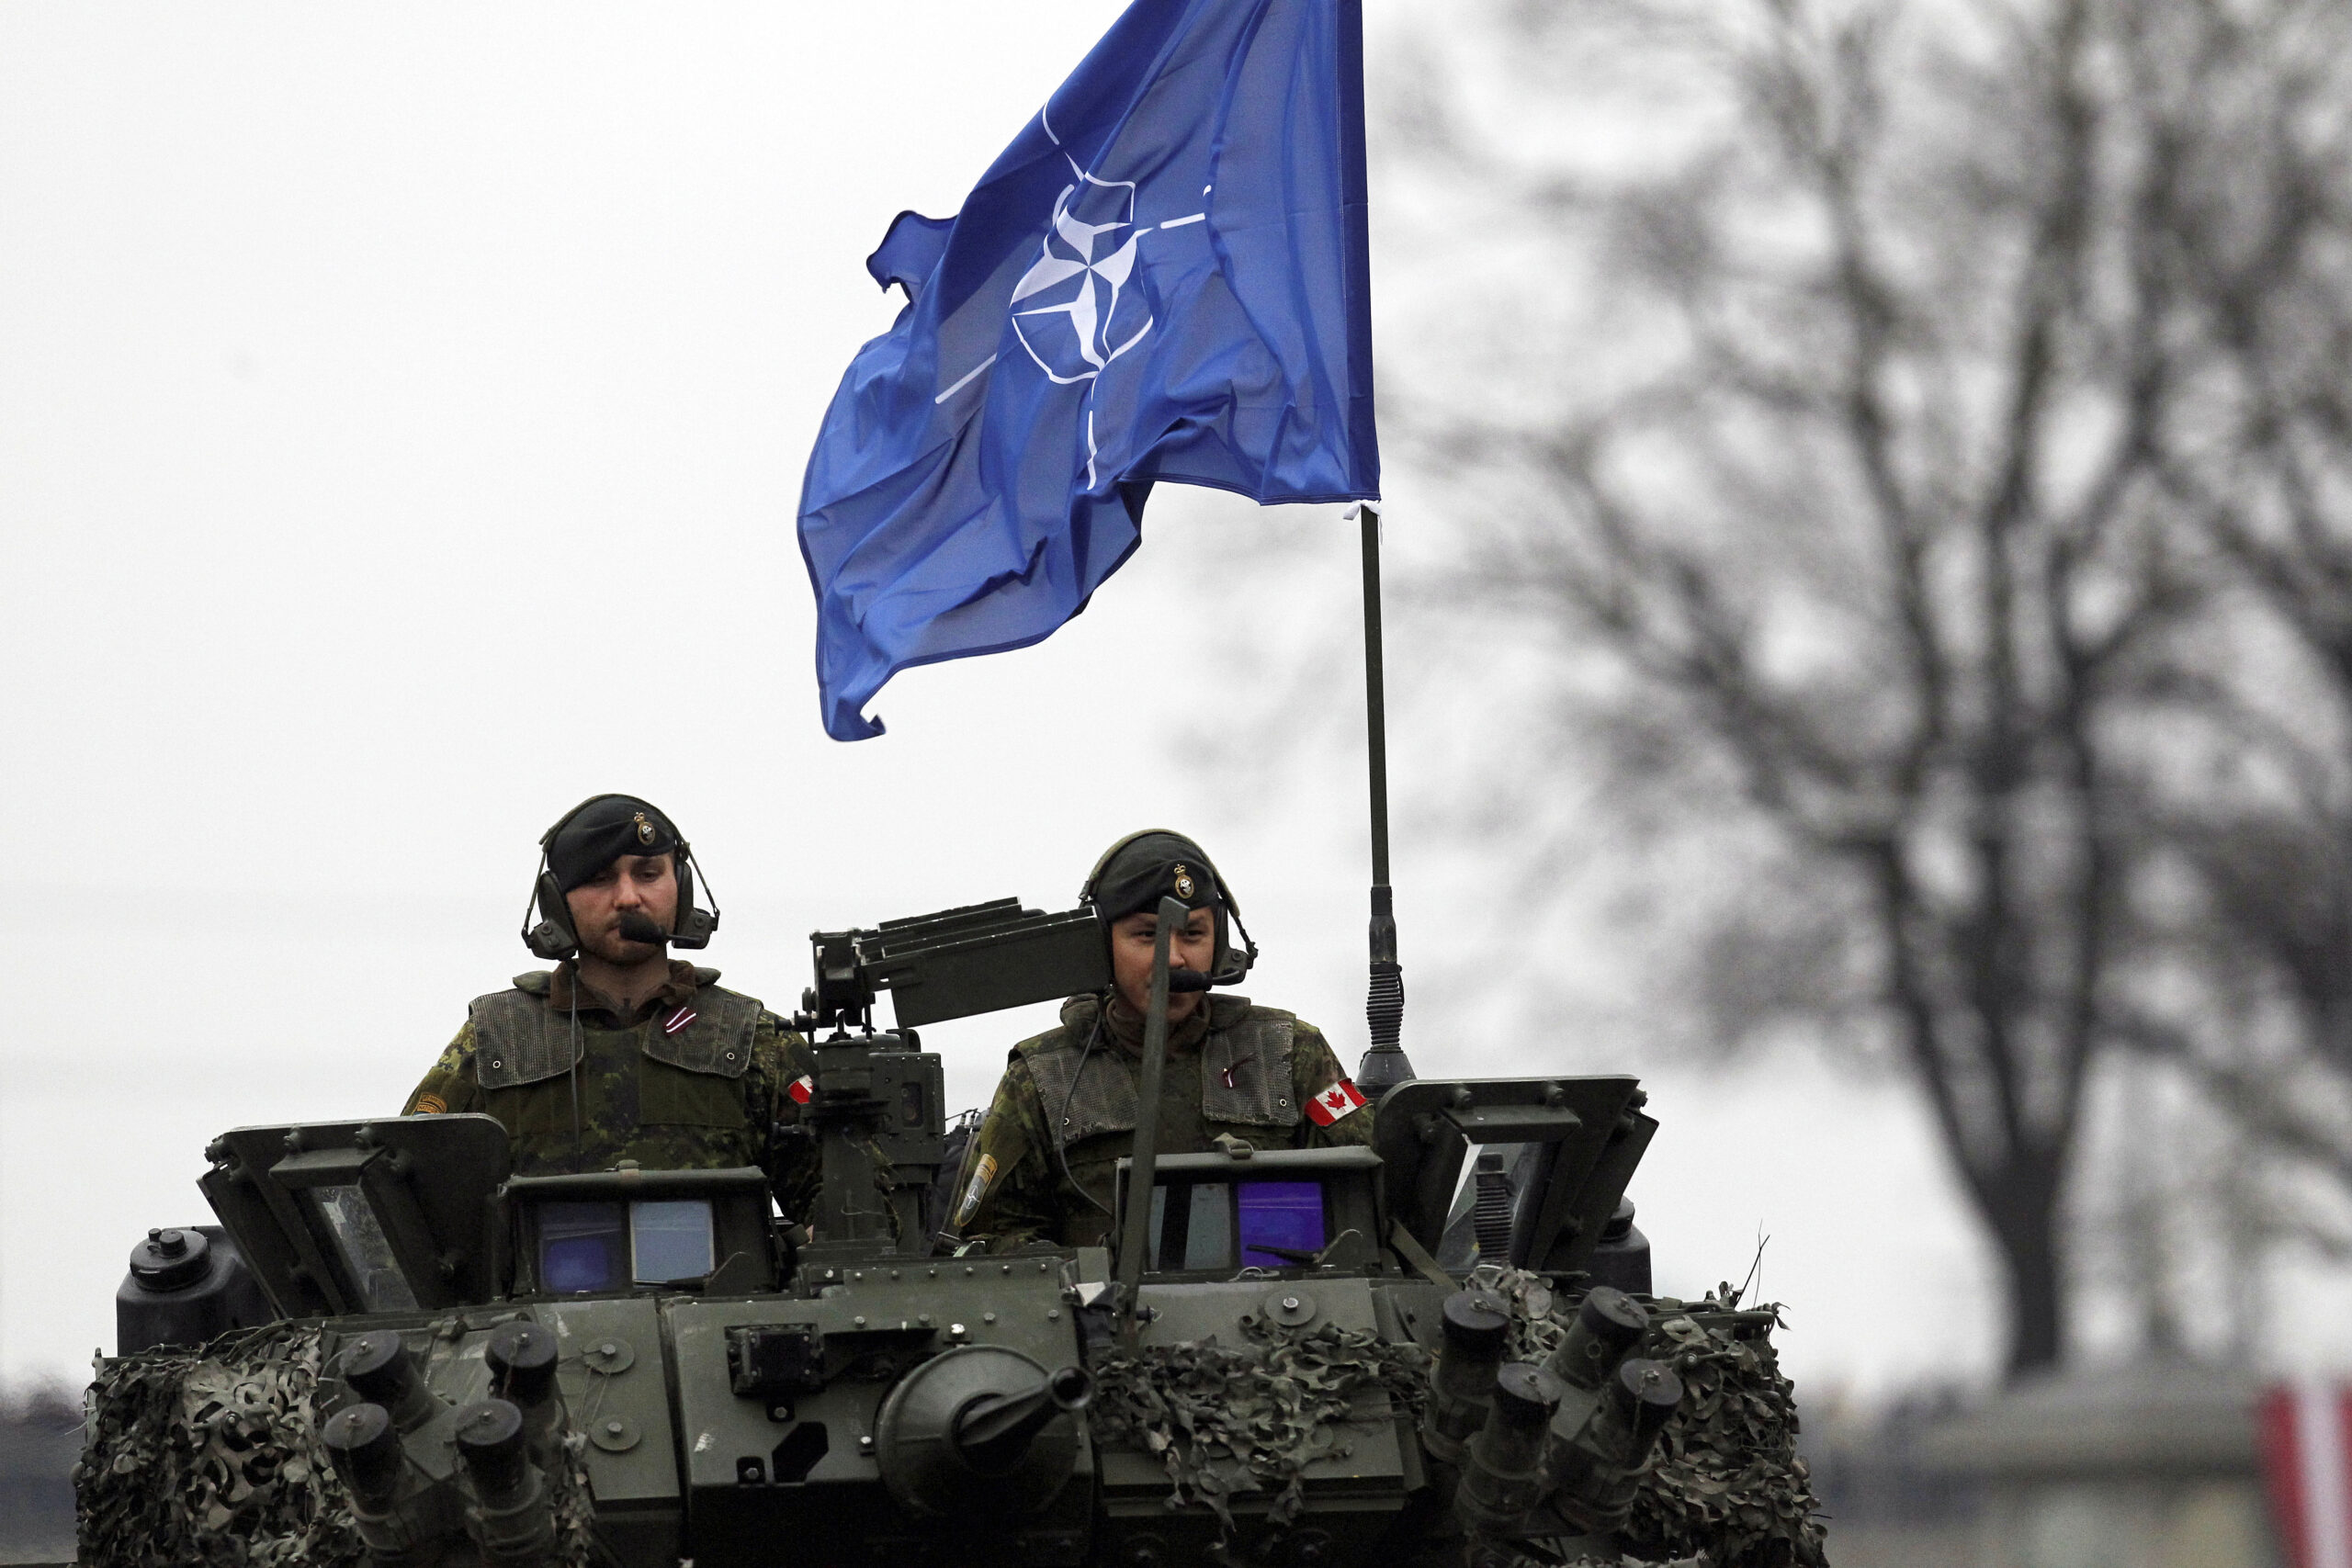 epa08006292 Canadian soldiers, members of the NATO Enhanced Forward Presence battle group, take part in a military parade during the celebrations of the 101st anniversary of Latvian Independence in Riga, Latvia, 18 November 2019. Latvia celebrates its 101st anniversary of declaration of independence by the People's Council of Latvia on 18 November 1918.  EPA-EFE/TOMS KALNINS